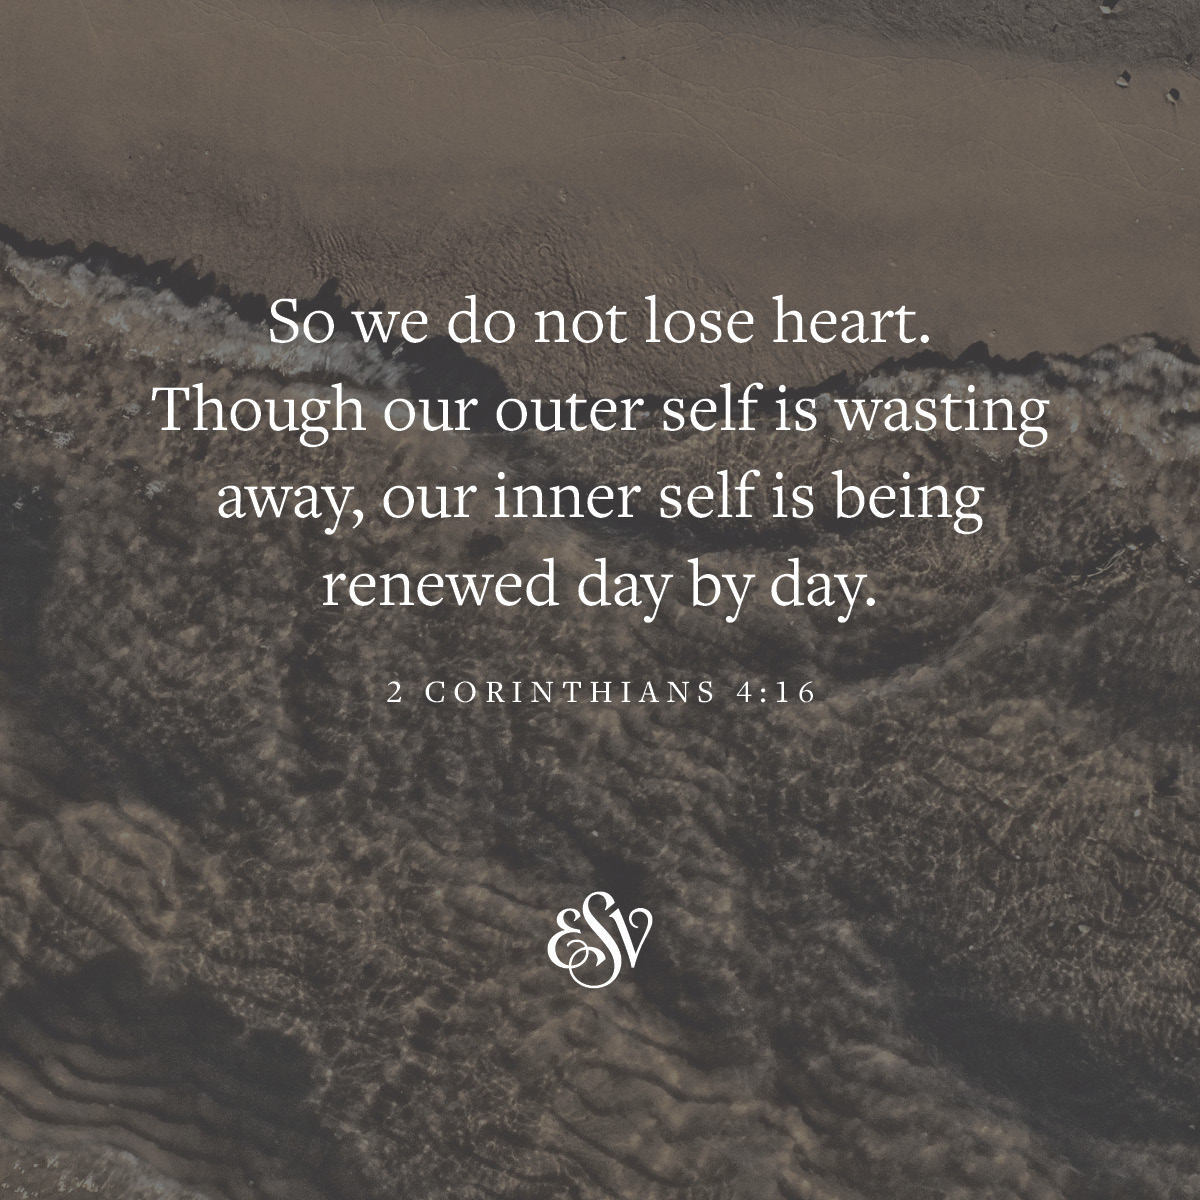 So we do not lose heart. Though our outer self is wasting away, our inner self is being renewed day by day. 
—2 Corinthians 4:16 ESV.org

#Verseoftheday #ESV #Scripturememoryverse #Bible